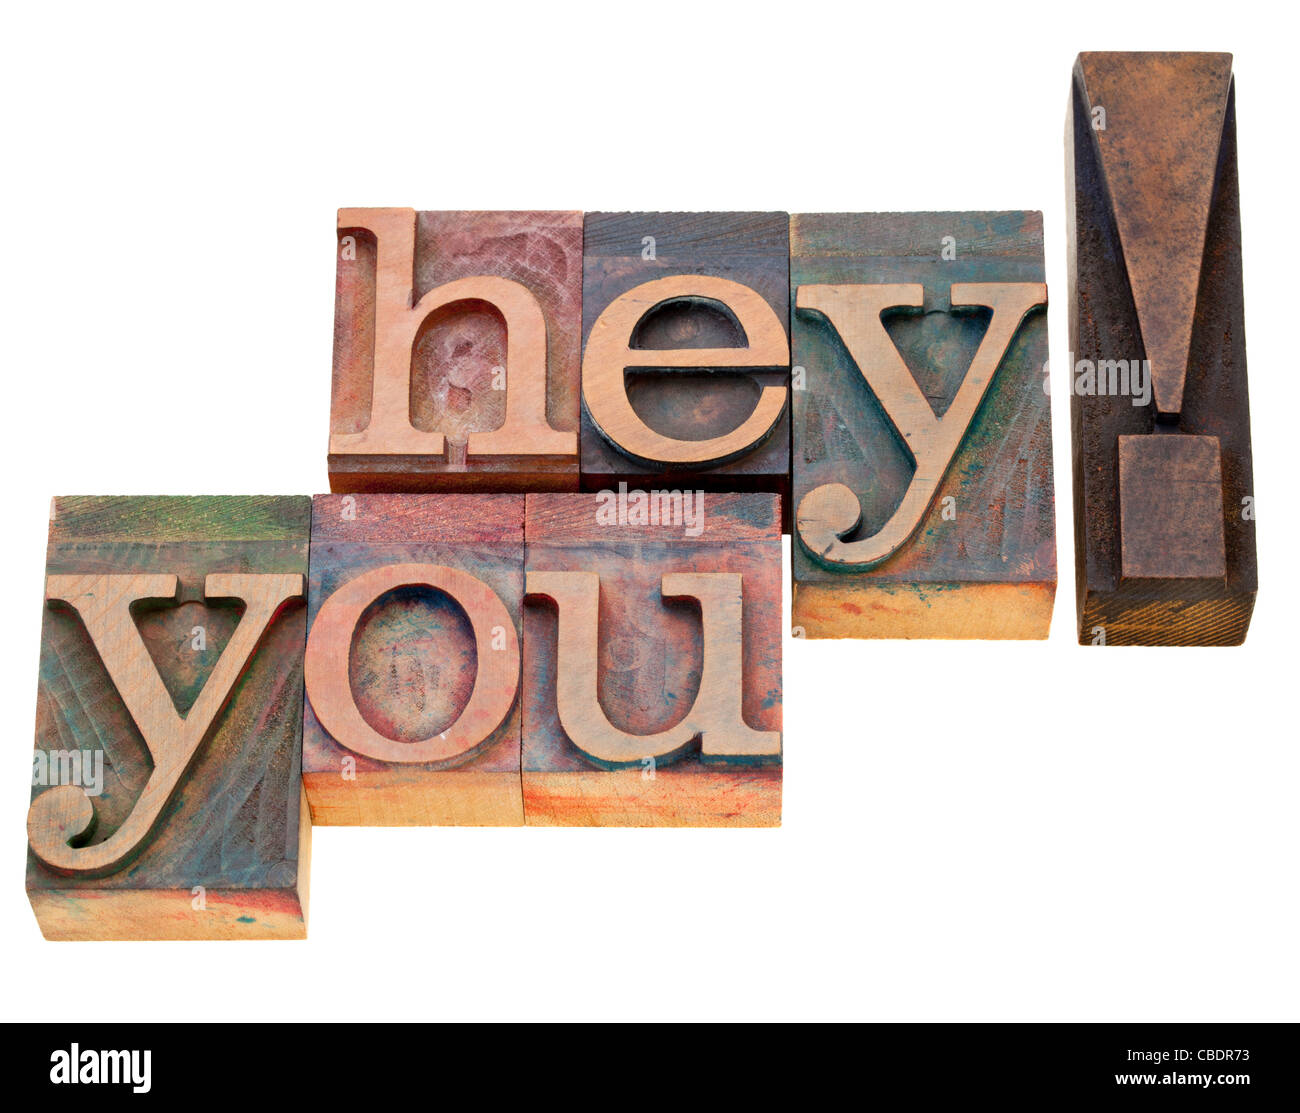 hey you - isolated exclamation words in vintage wood letterpress printing blocks Stock Photo